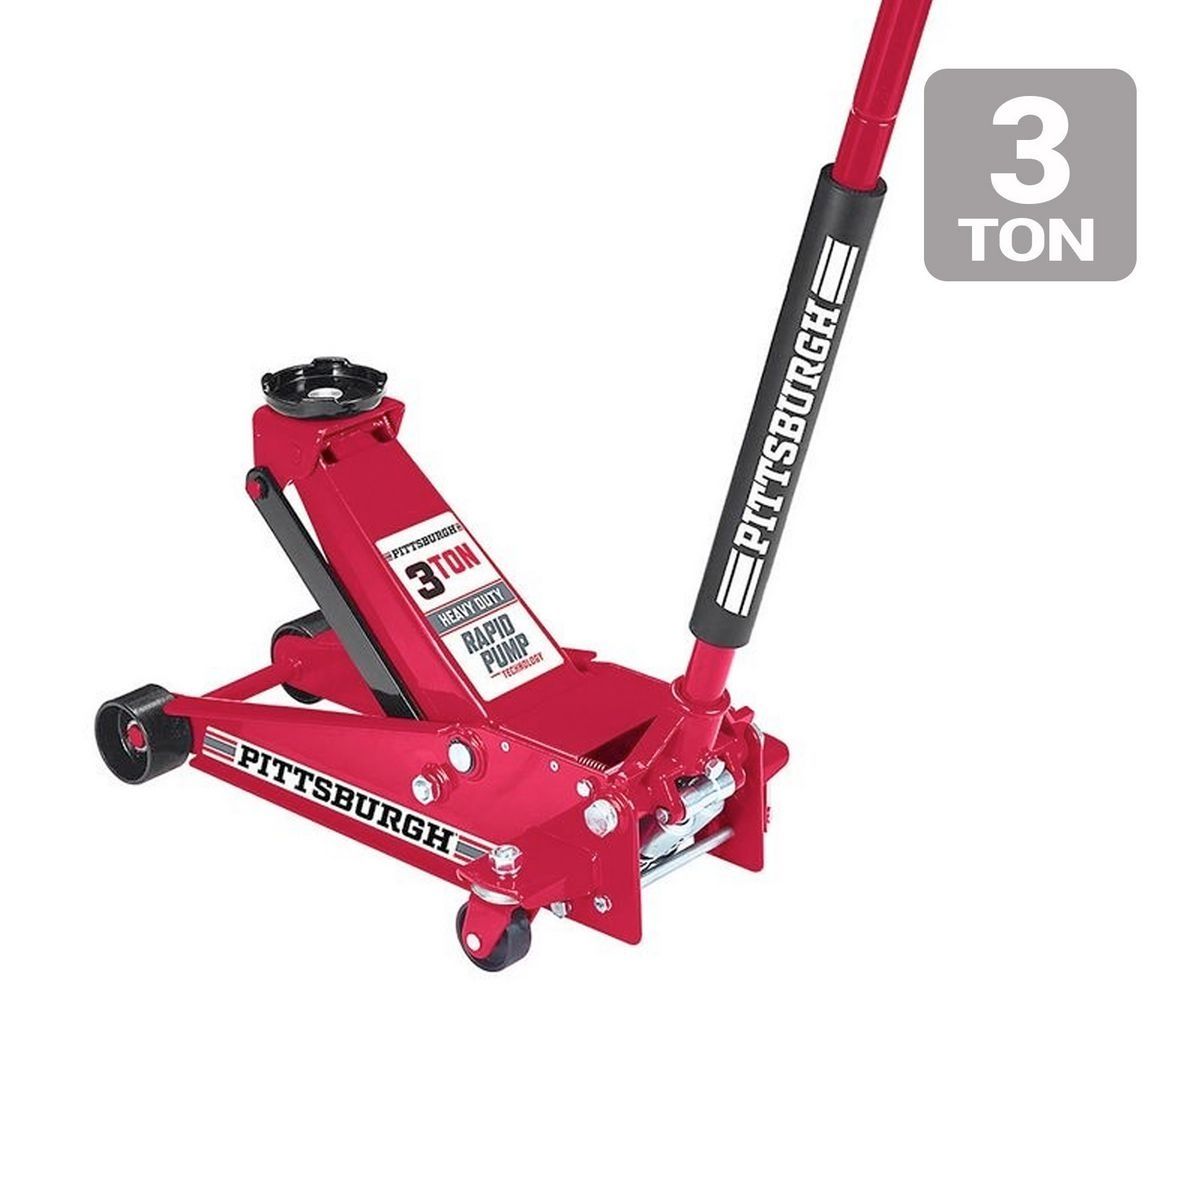 Select Harbor Freight Stores: 3-Ton Pittsburgh Floor Jack w/ Rapid Pump (Red) $89.97 (Stock/Availability May Vary)